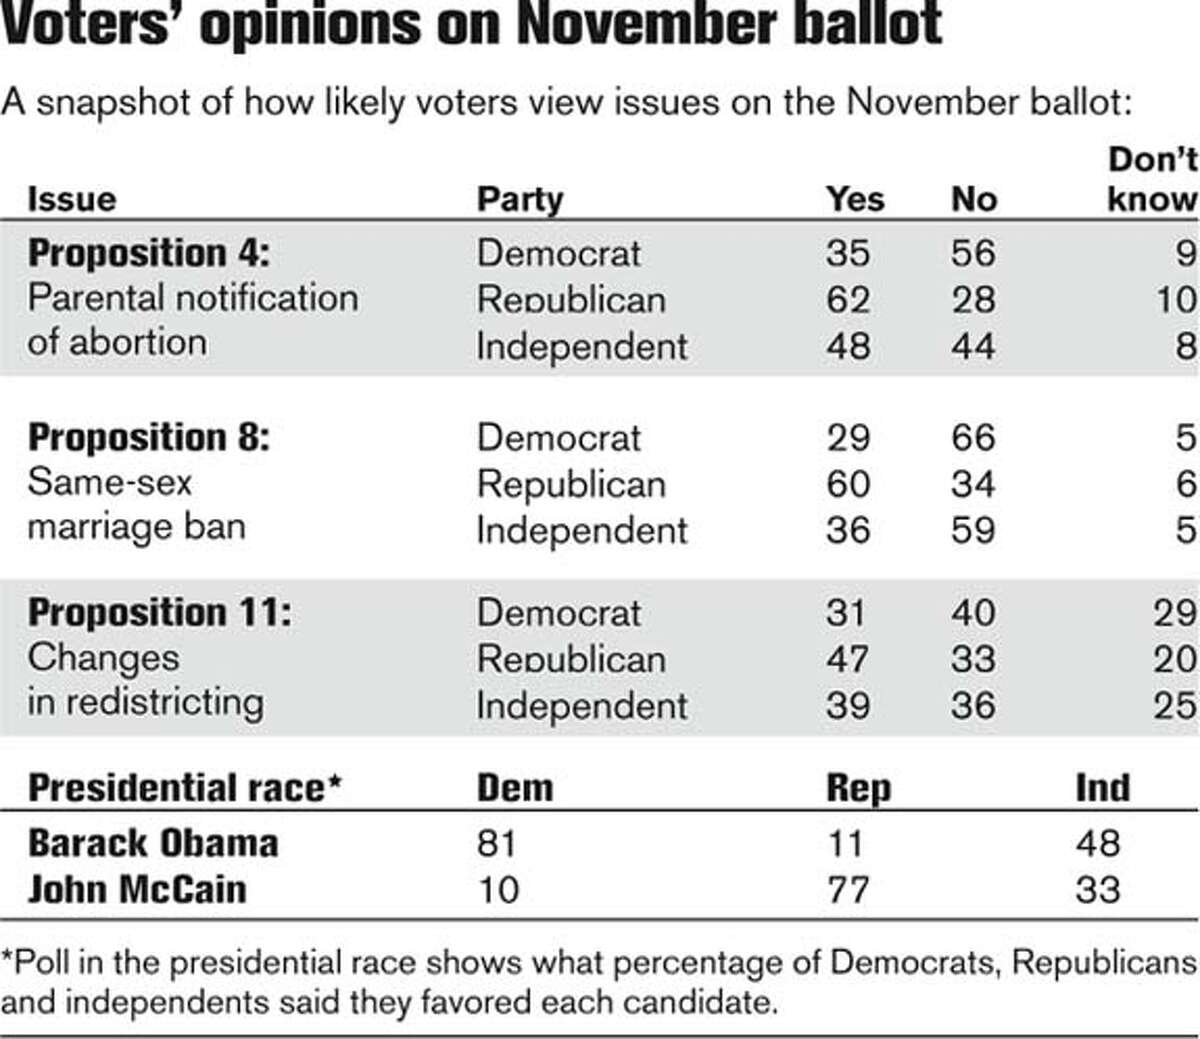 Voters' opinions on November ballot (Chronicle Graphic)